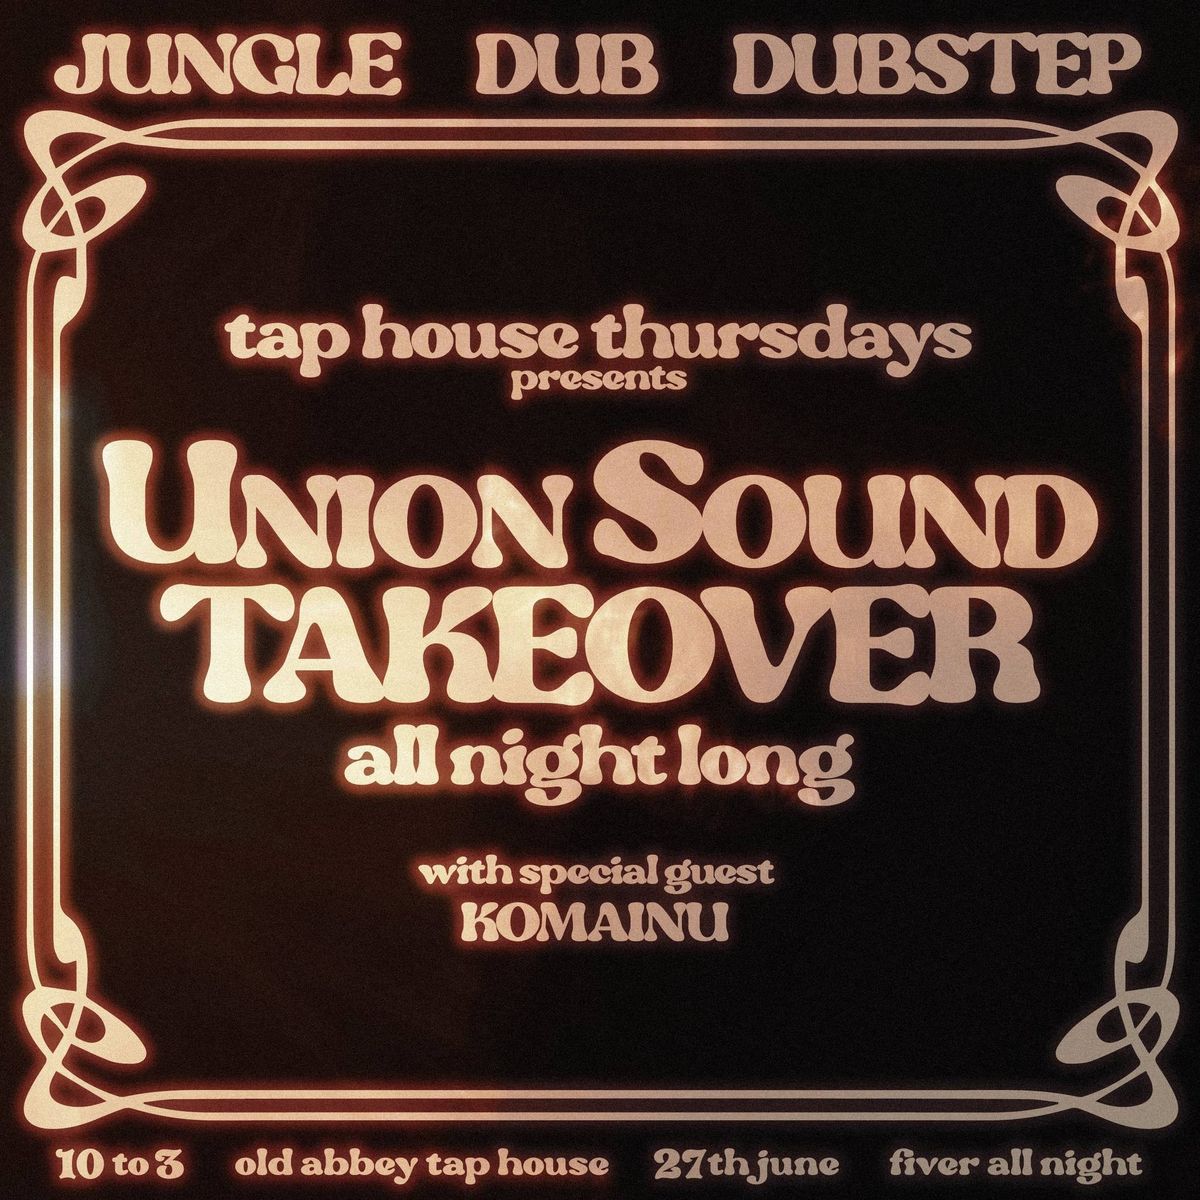 Union Sound Takeover at Taphouse Thursdays! 